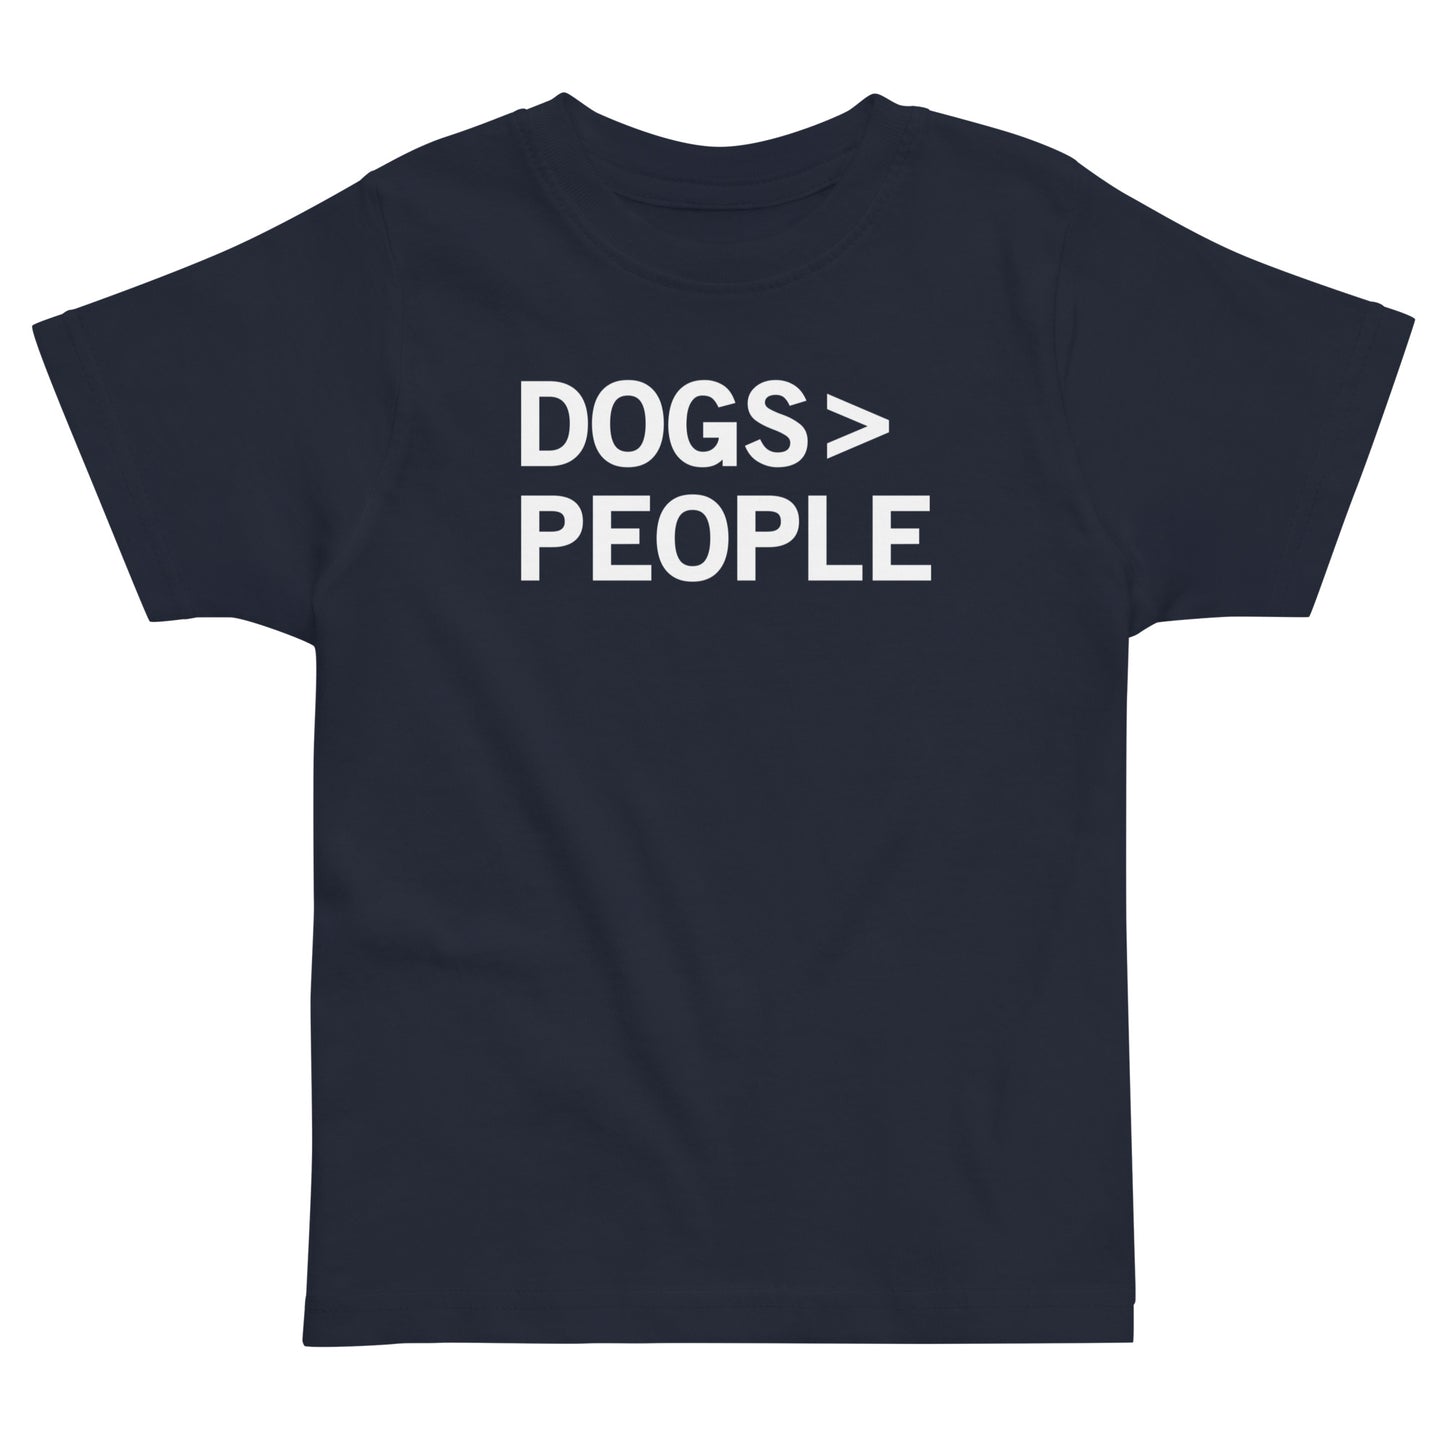 Dogs>People Kid's Toddler Tee